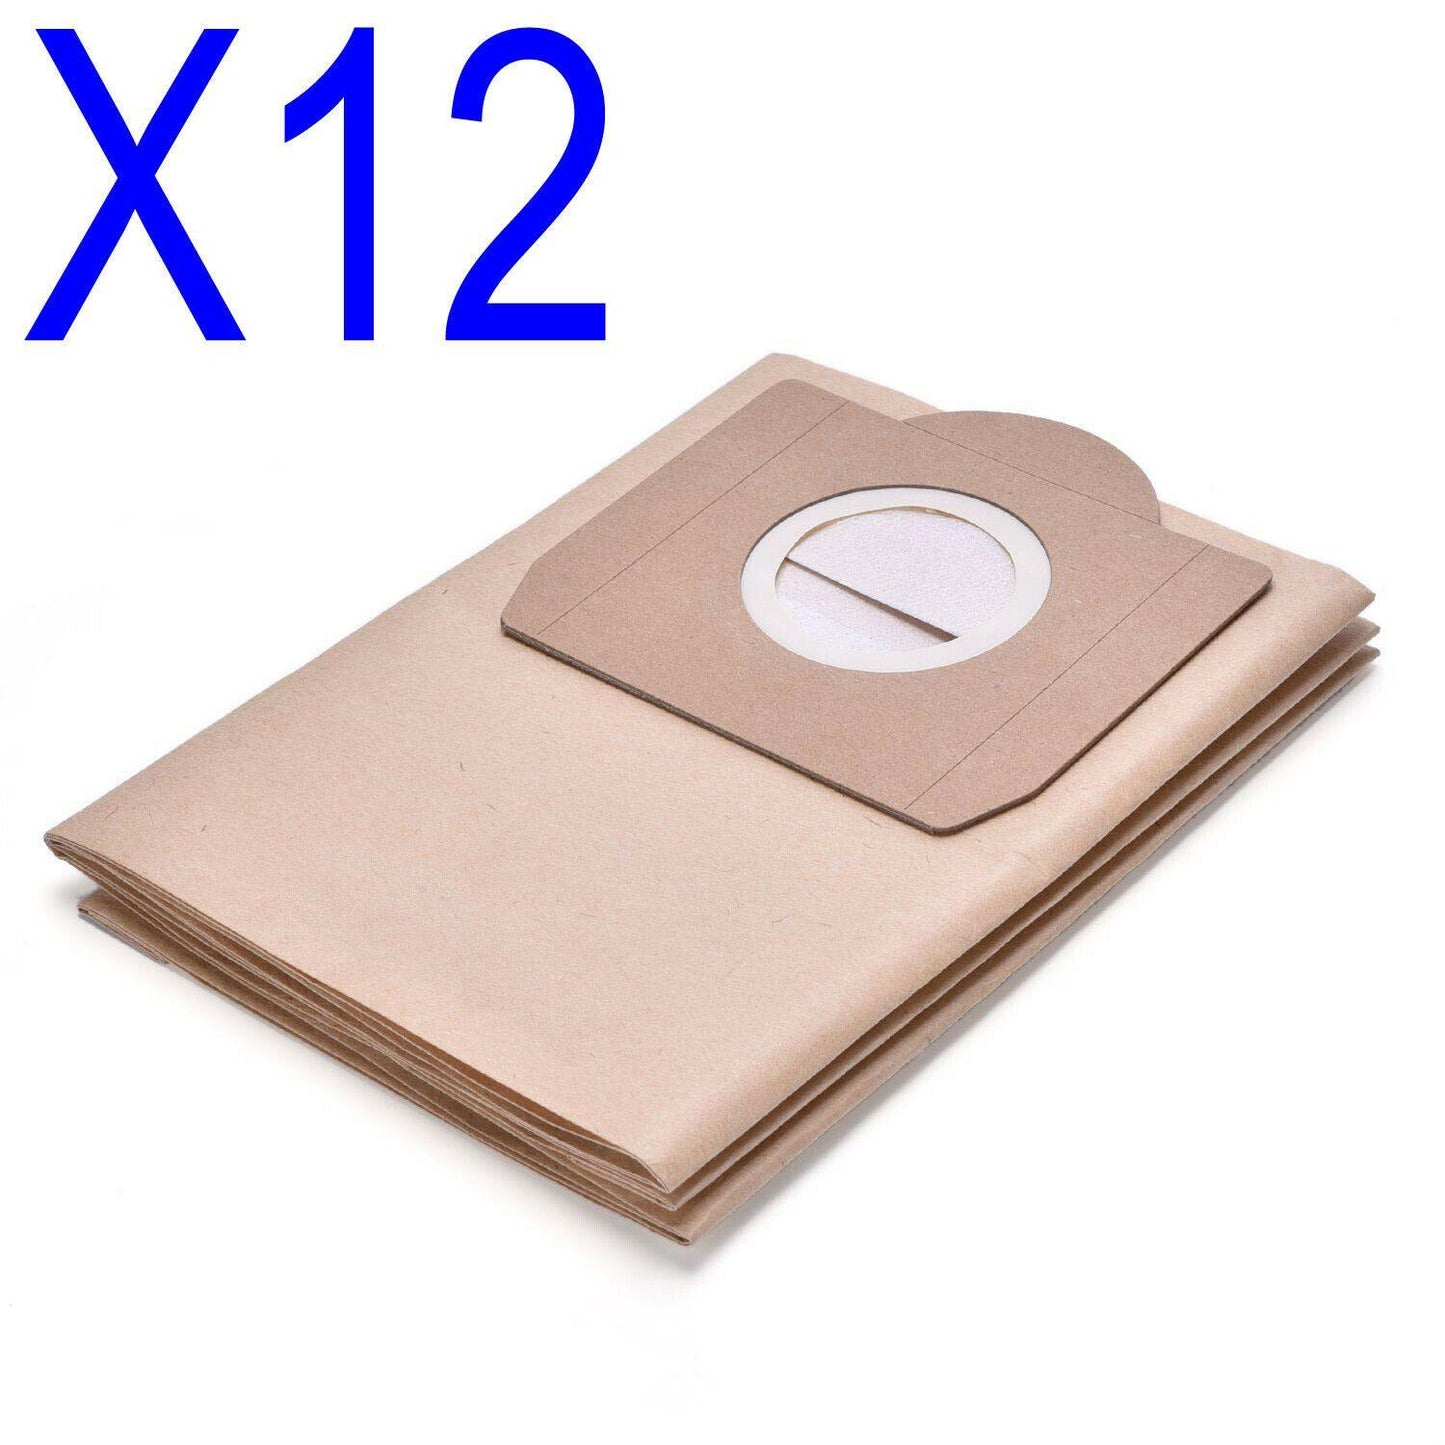 12X Vacuum Dust Paper Bags for Karcher WD3.5 P Premium K2201 A2204 A2254 Sparesbarn